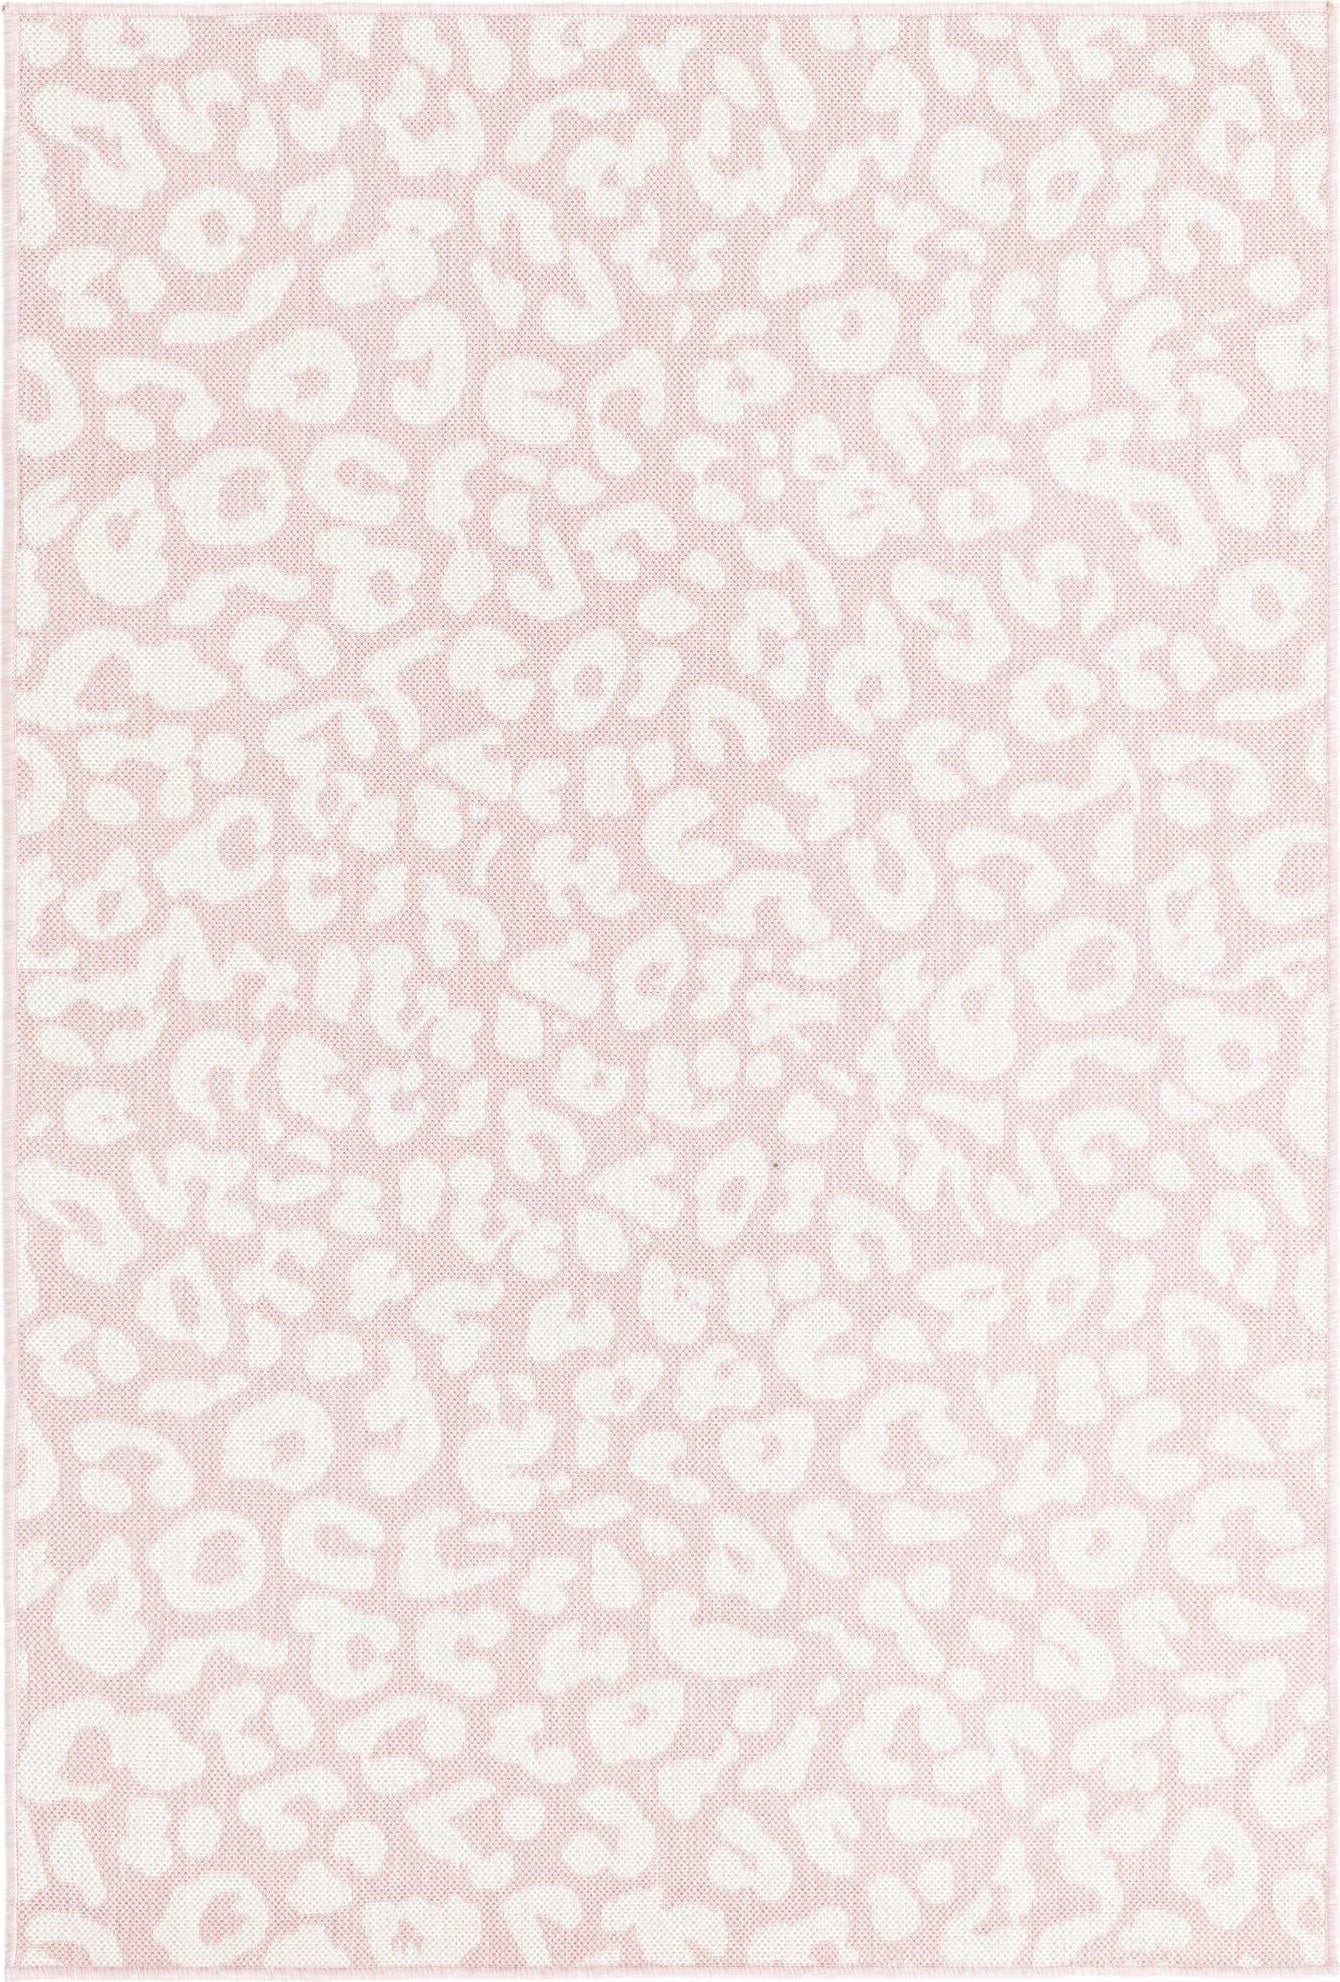 Unique Loom Outdoor Safari T-KZOD6 Pink Ivory Area Rug